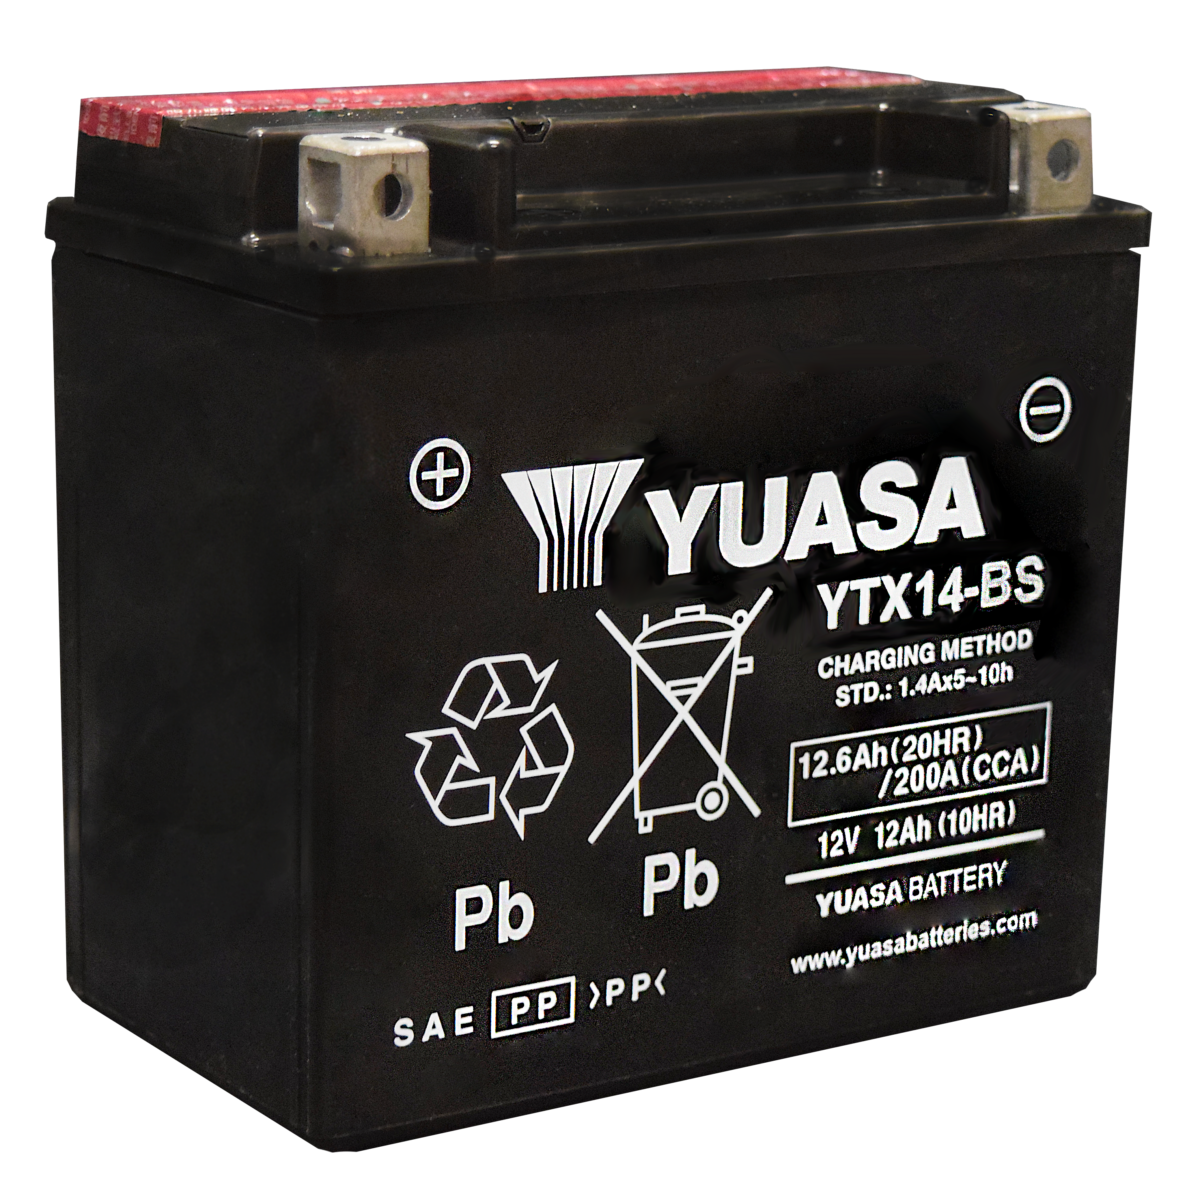 Yuasa YTX14-BS AGM Battery for motorsports, powersports, and motorcycle